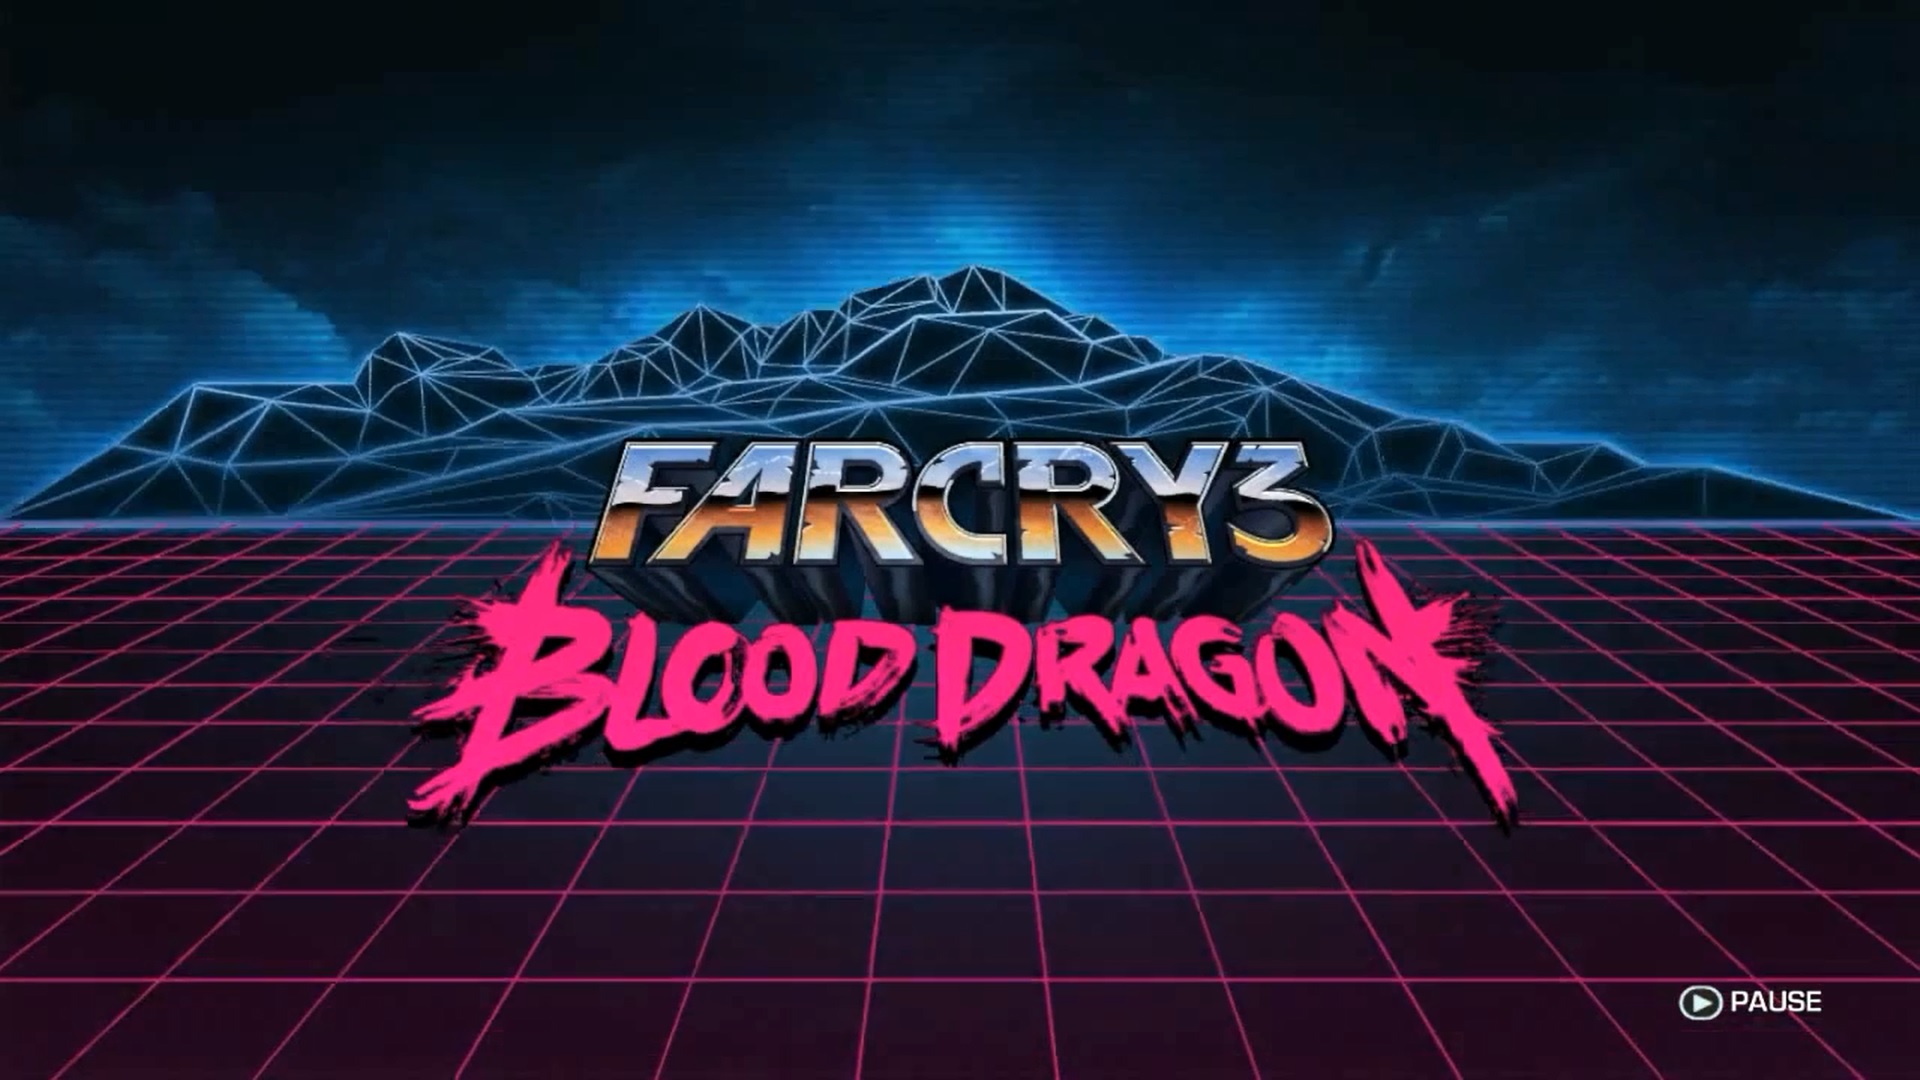 Far Cry 3 Blood Dragon: A Blast from the Past